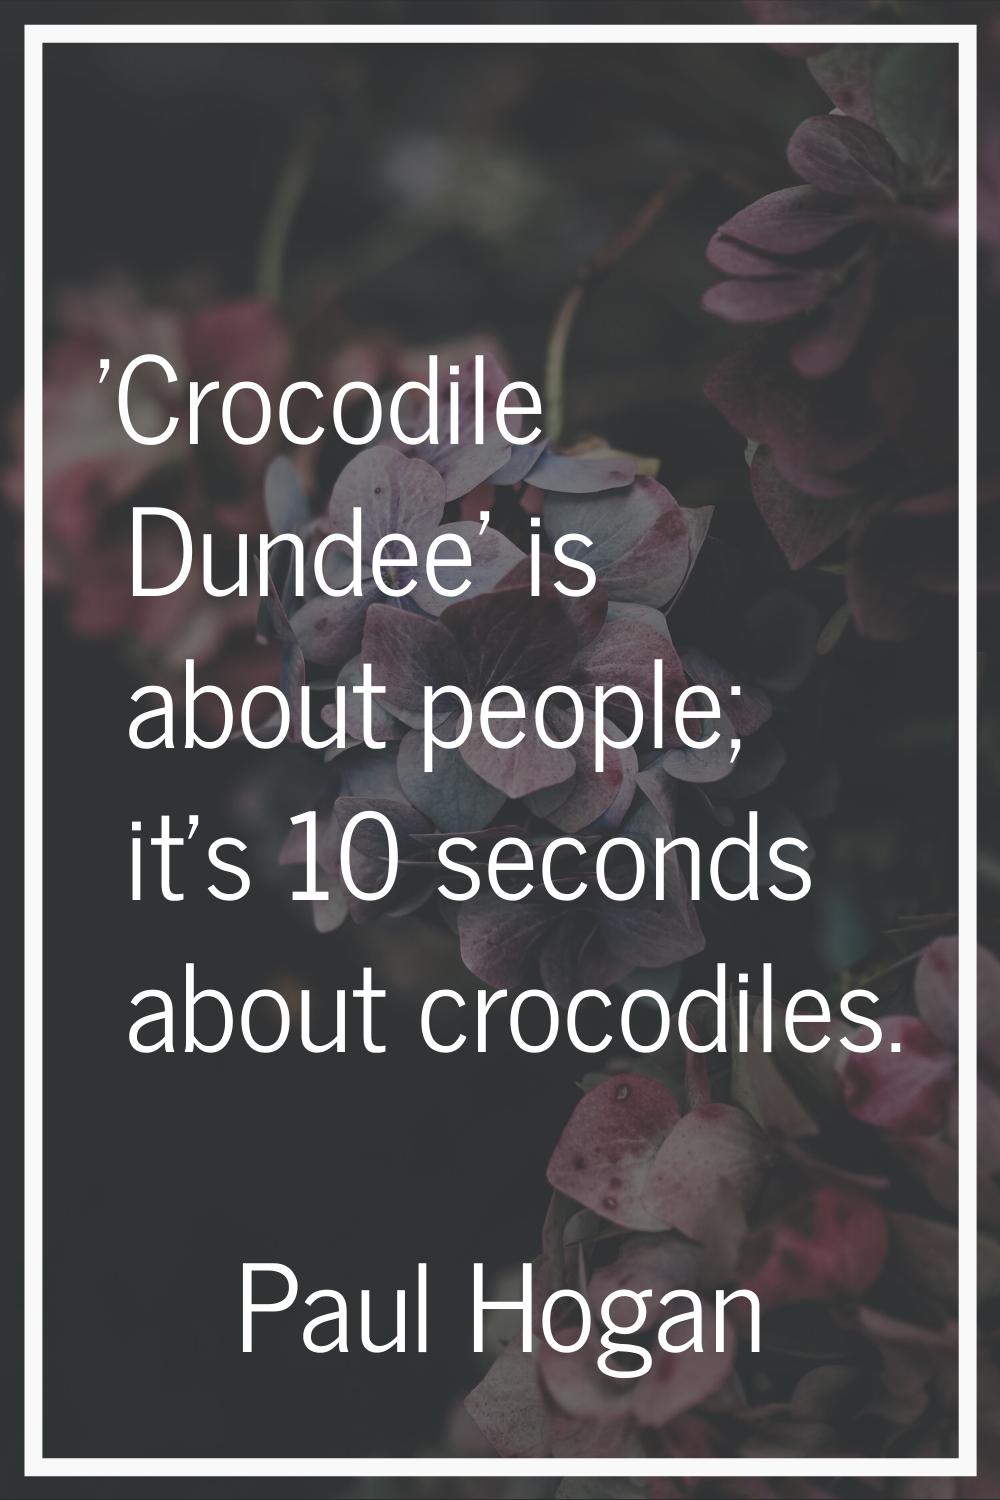 'Crocodile Dundee' is about people; it's 10 seconds about crocodiles.